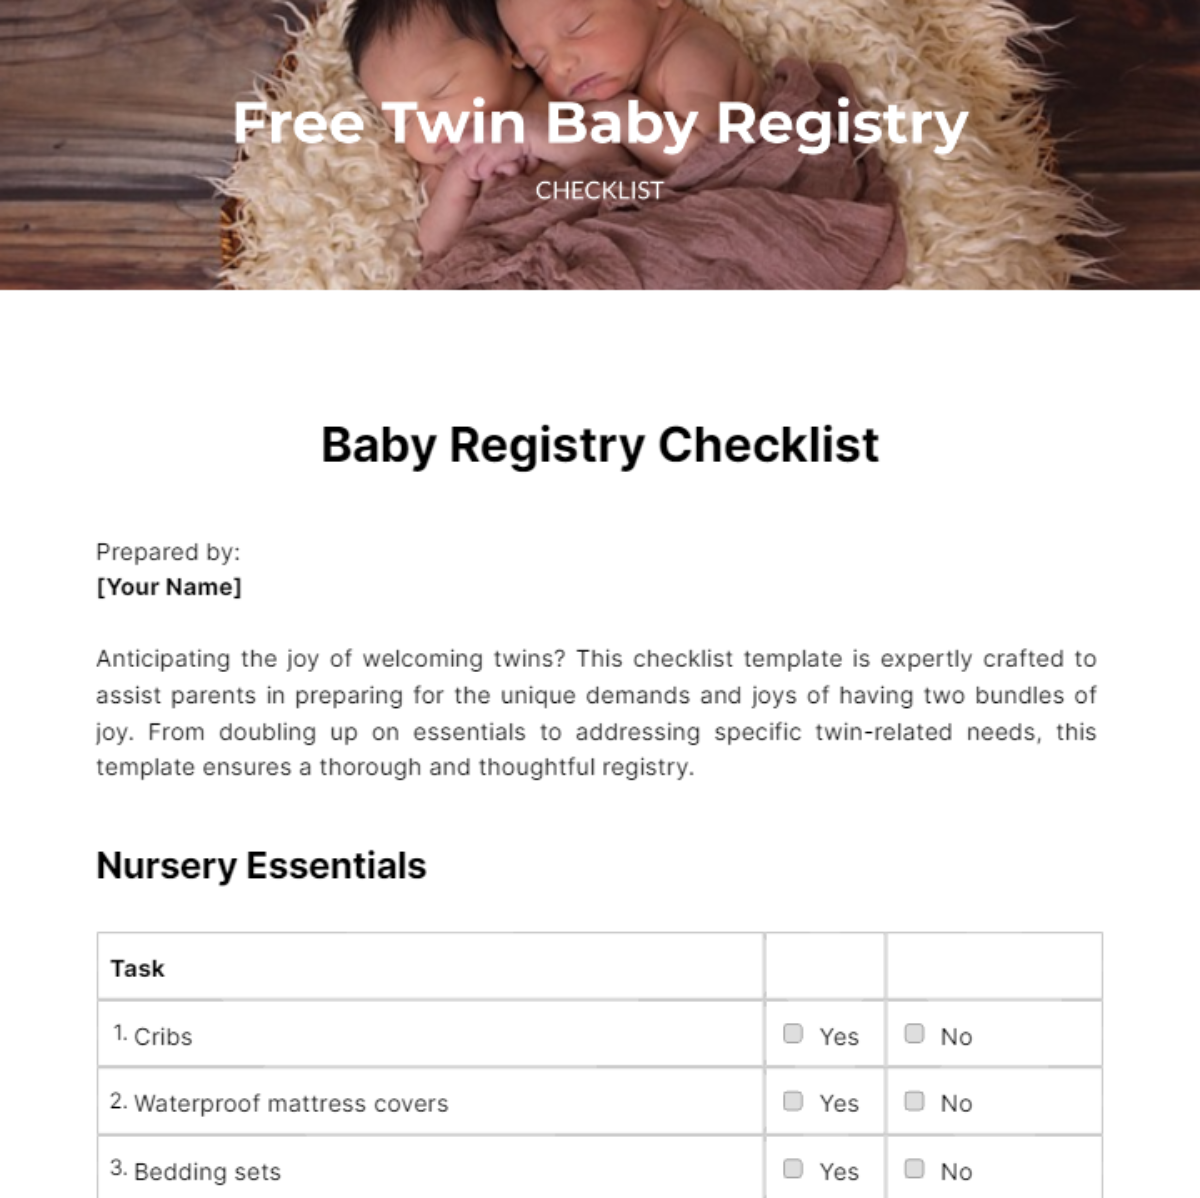 Free Twin Baby Registry Checklist Template